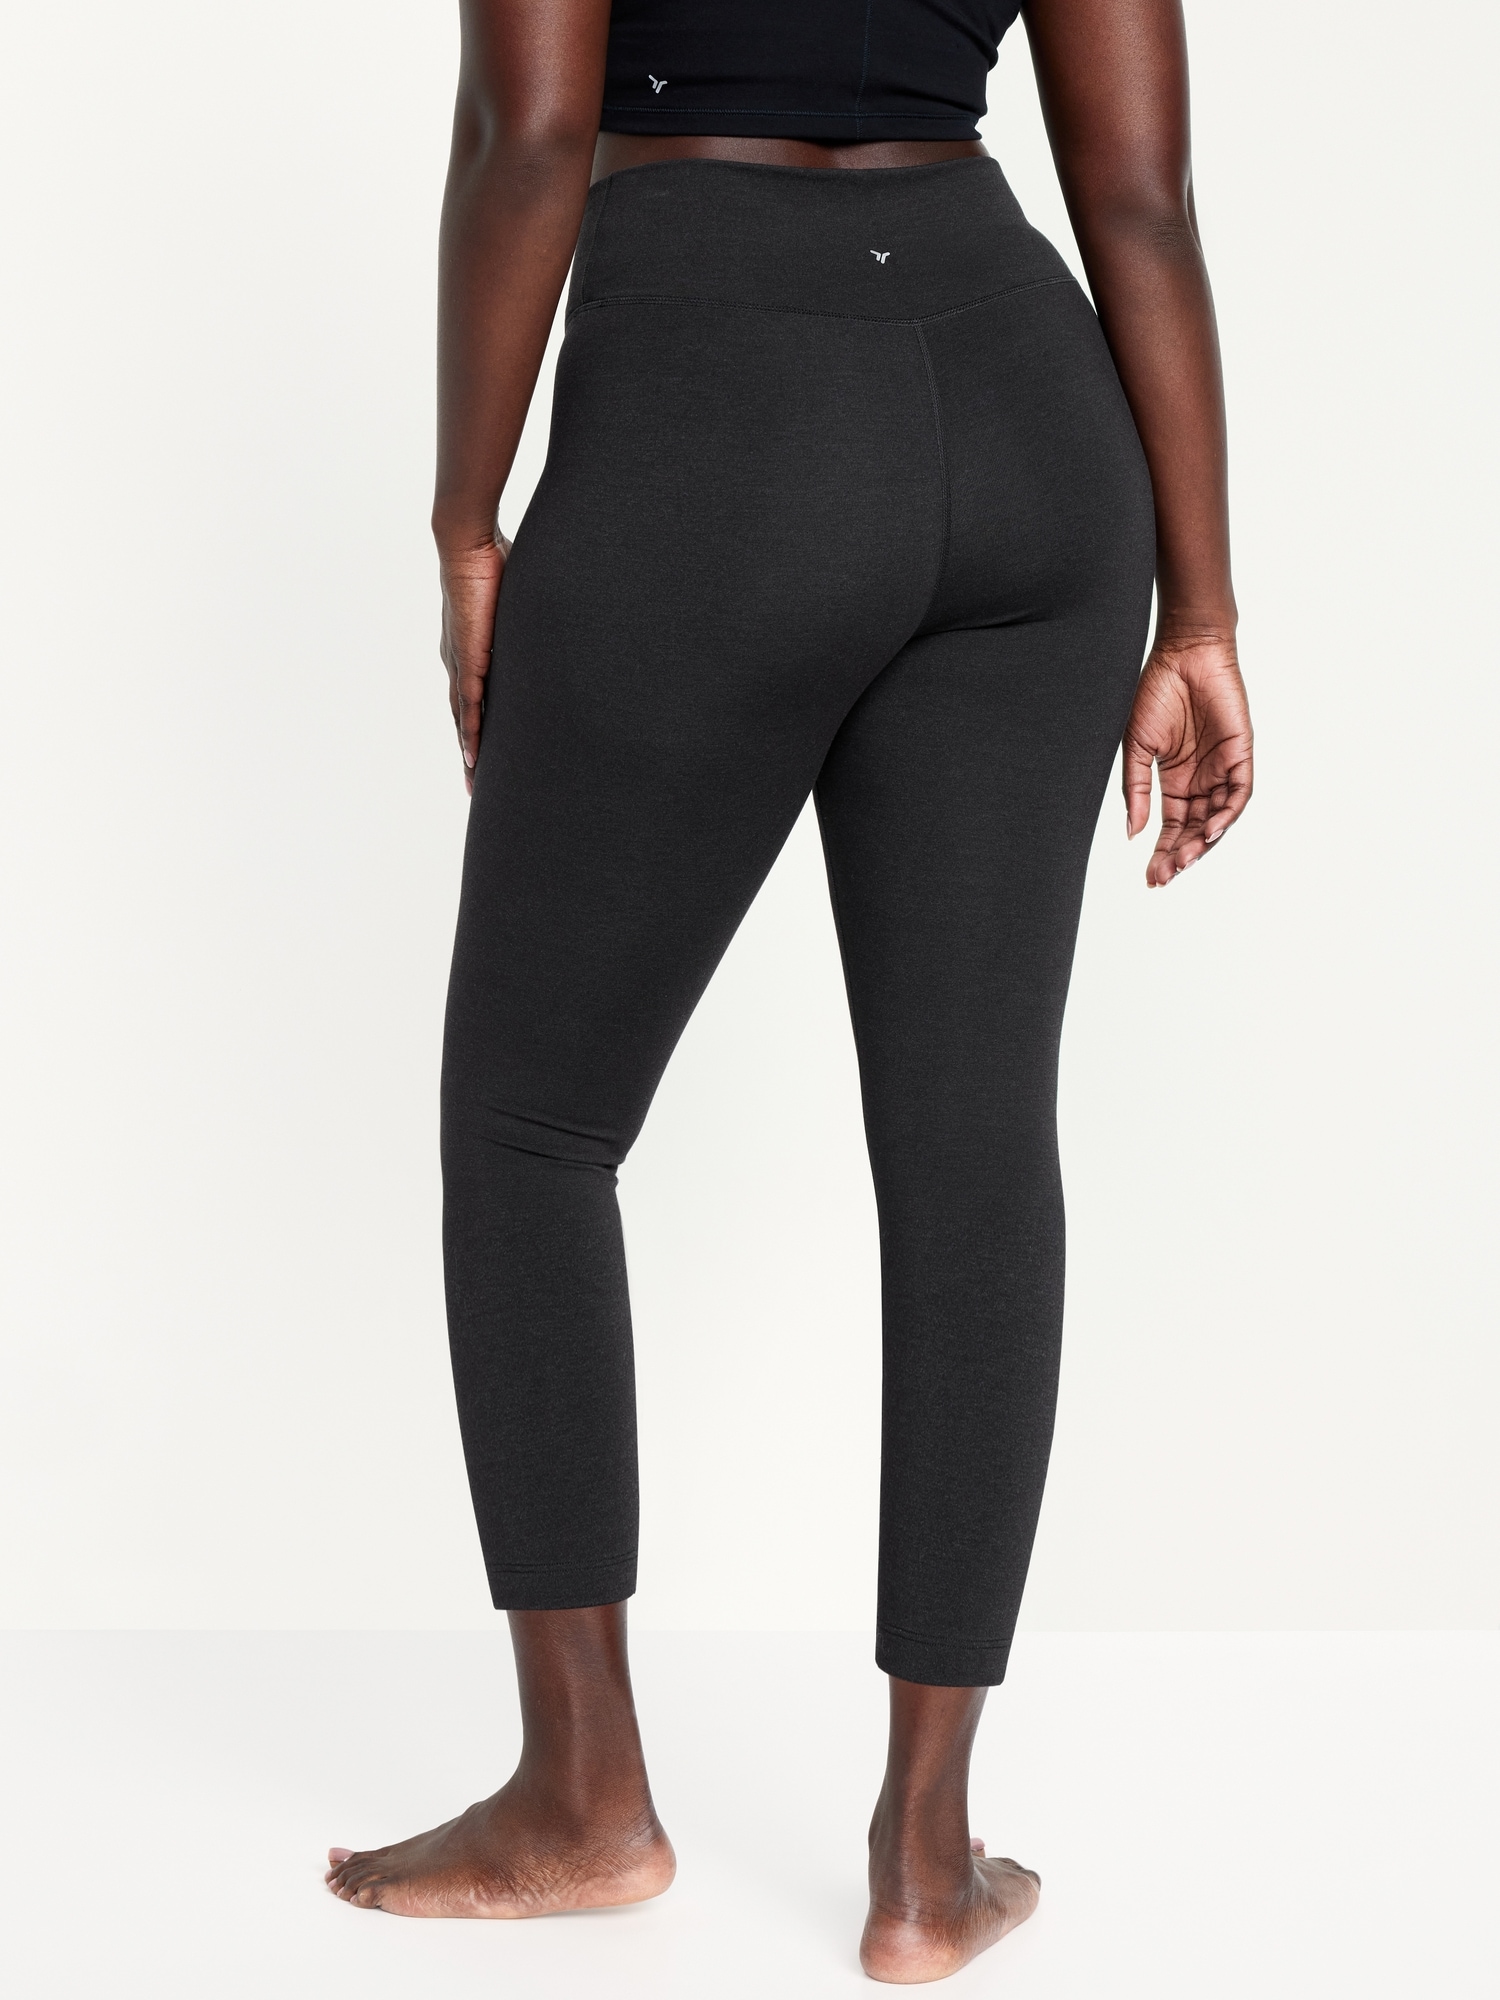 Yogalicious Leggings Have the Most Flattering Criss-Cross Design | Us Weekly